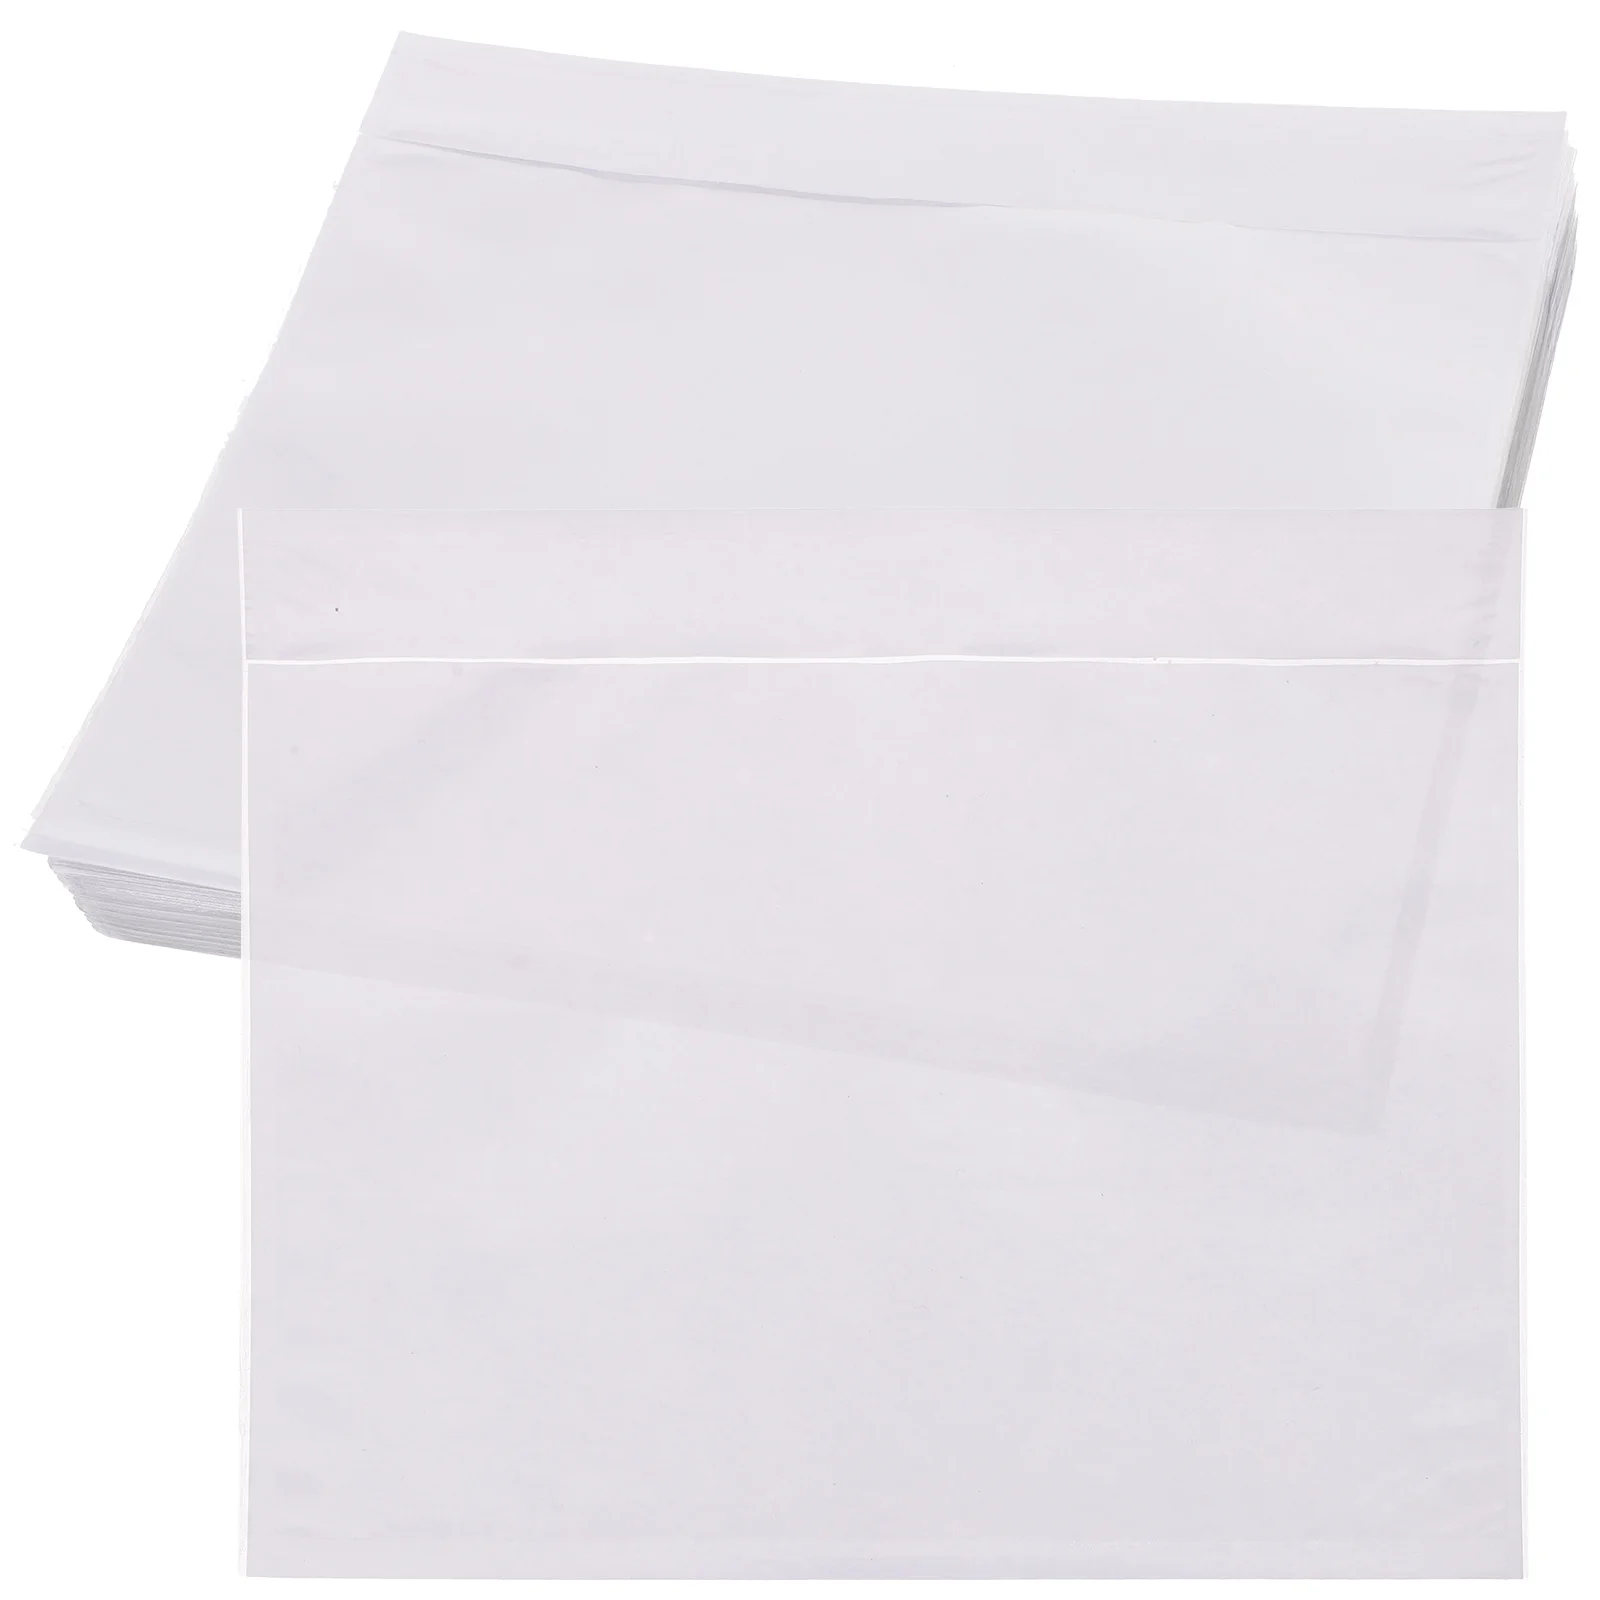 

100pcs Self-Adhesive Packing List Envelopes Transparent Packing List Pouches for Invoice Shipping Label (15x18cm)